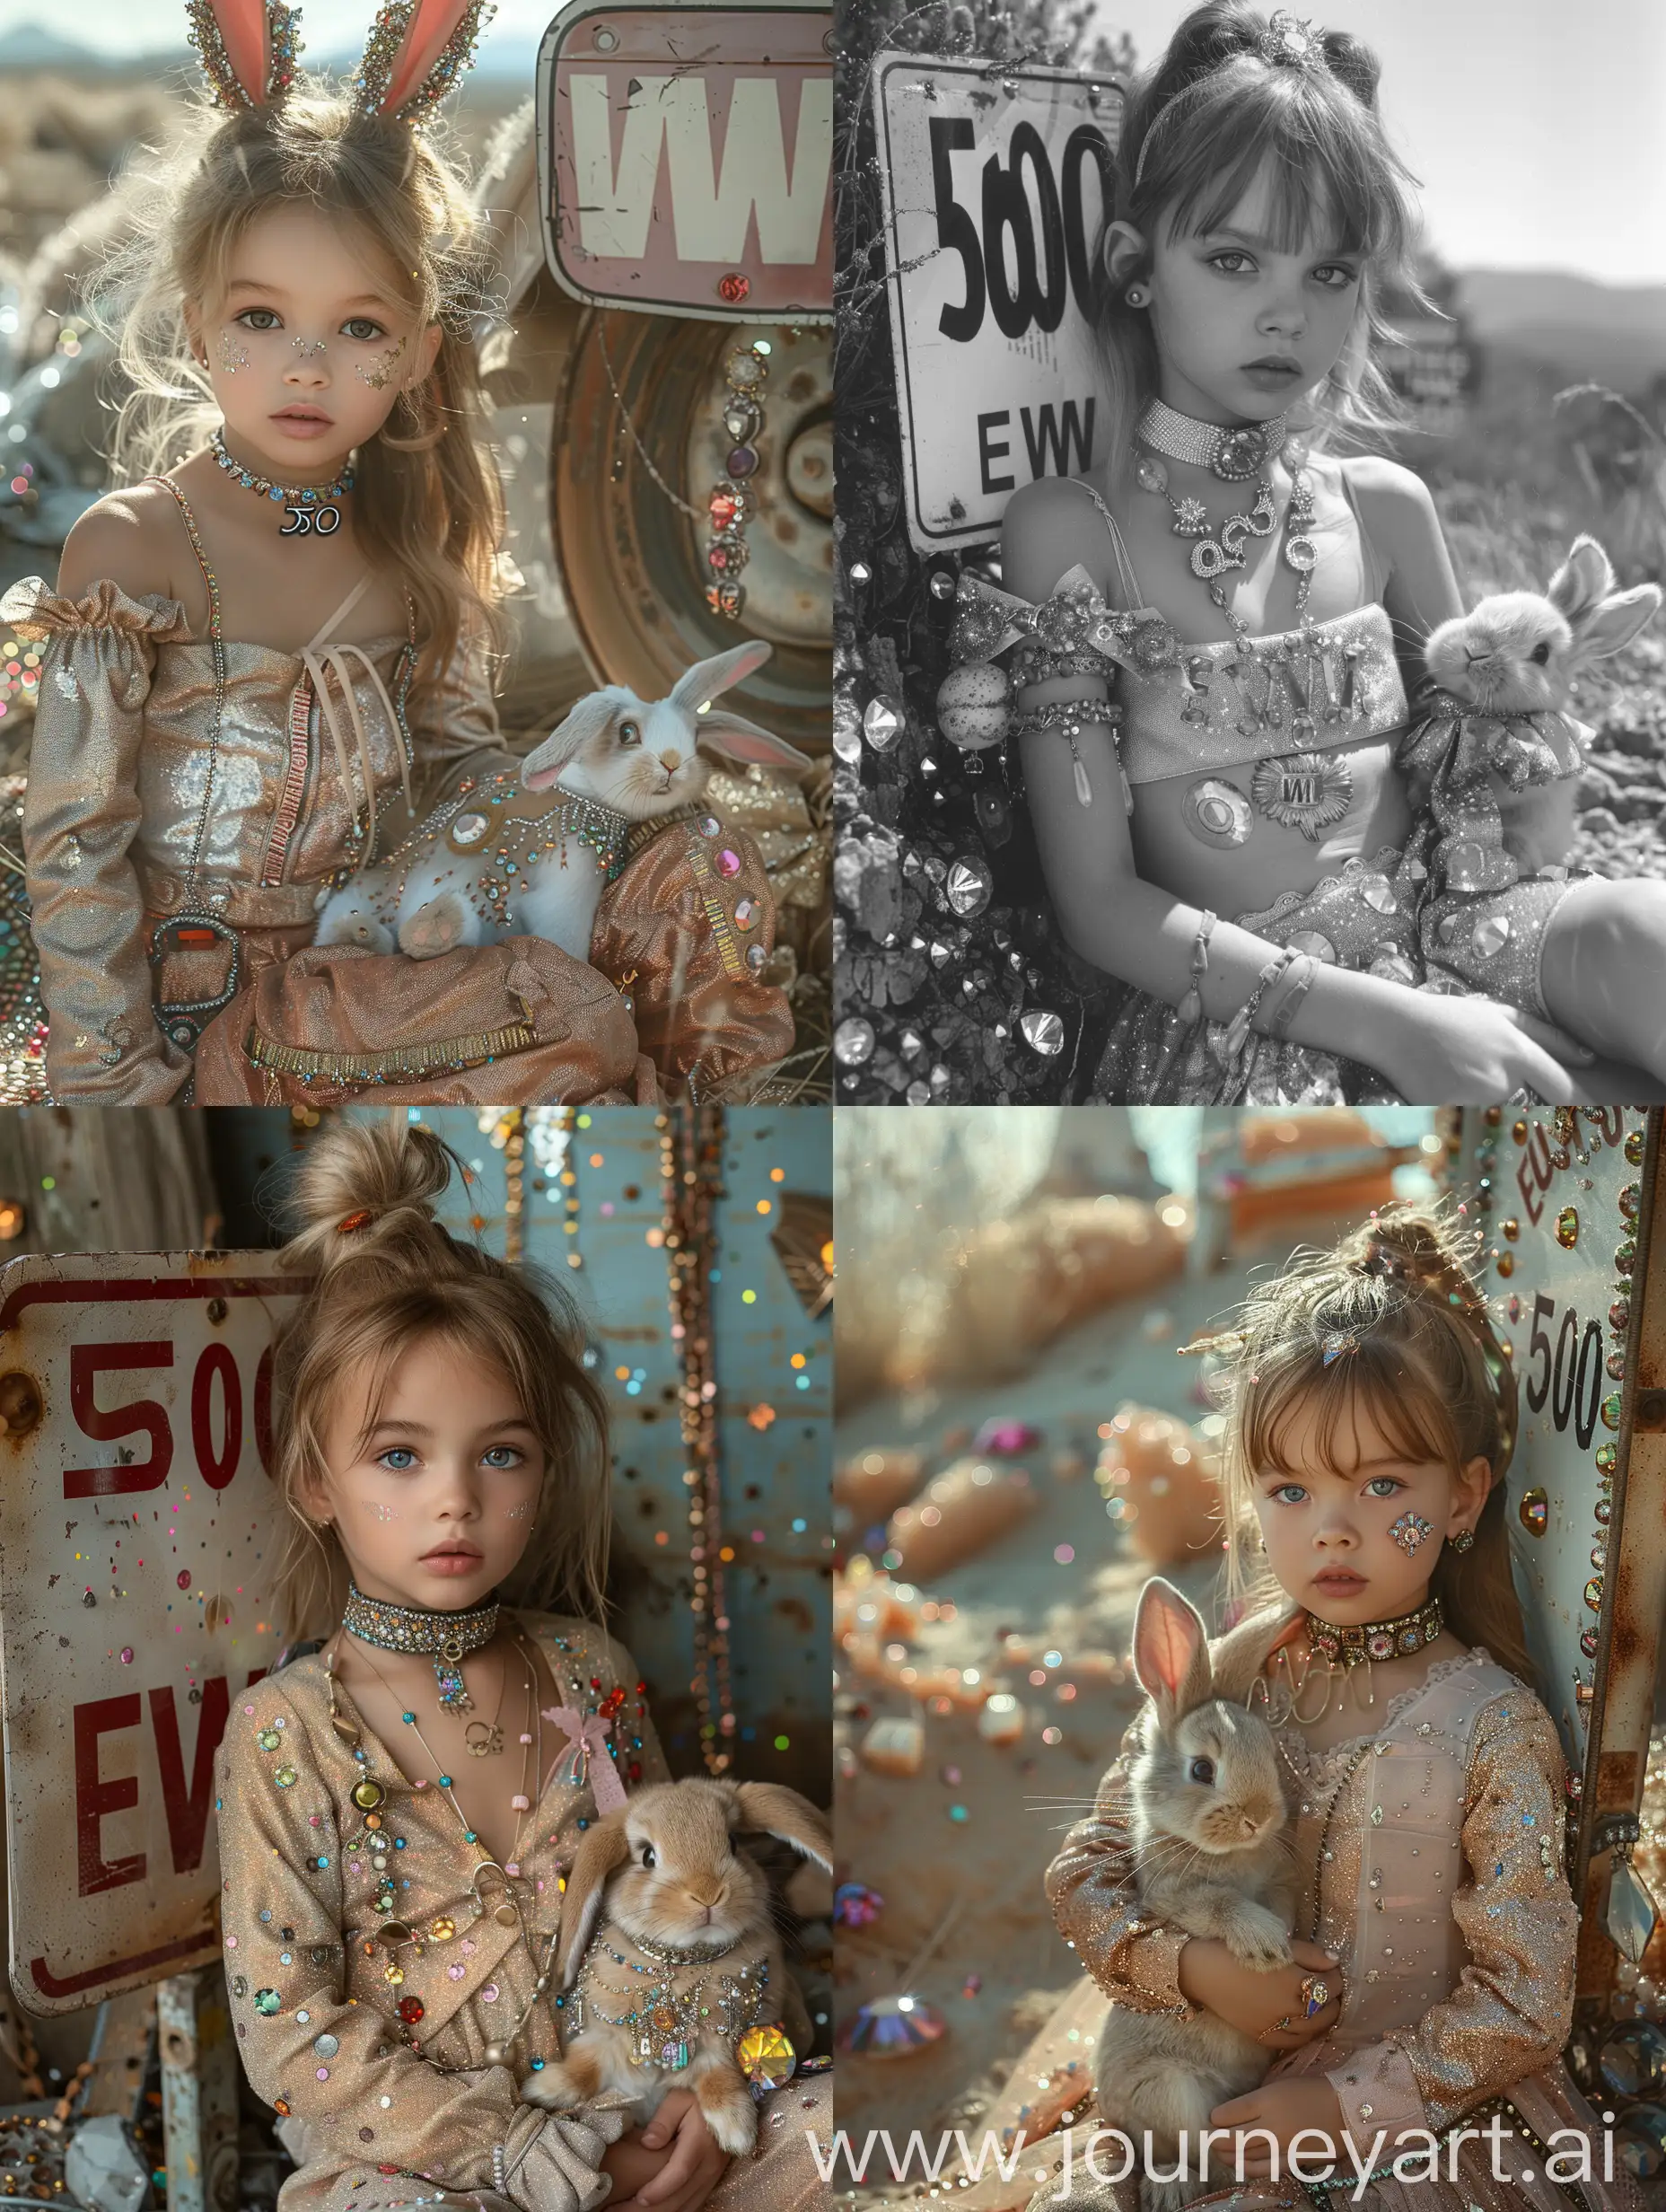 surreal photograph from a cute little girl, who is sitting next to a sign with the insription "500", the girl wear a choker with the insription "EWW" and clothes with glitter finishes and shiny gems and wears a lot of jewelry, in her arms is a cute bunny,  in the landscape there are gems, glitter and diamonds --stylize 700 --style raw --v 6